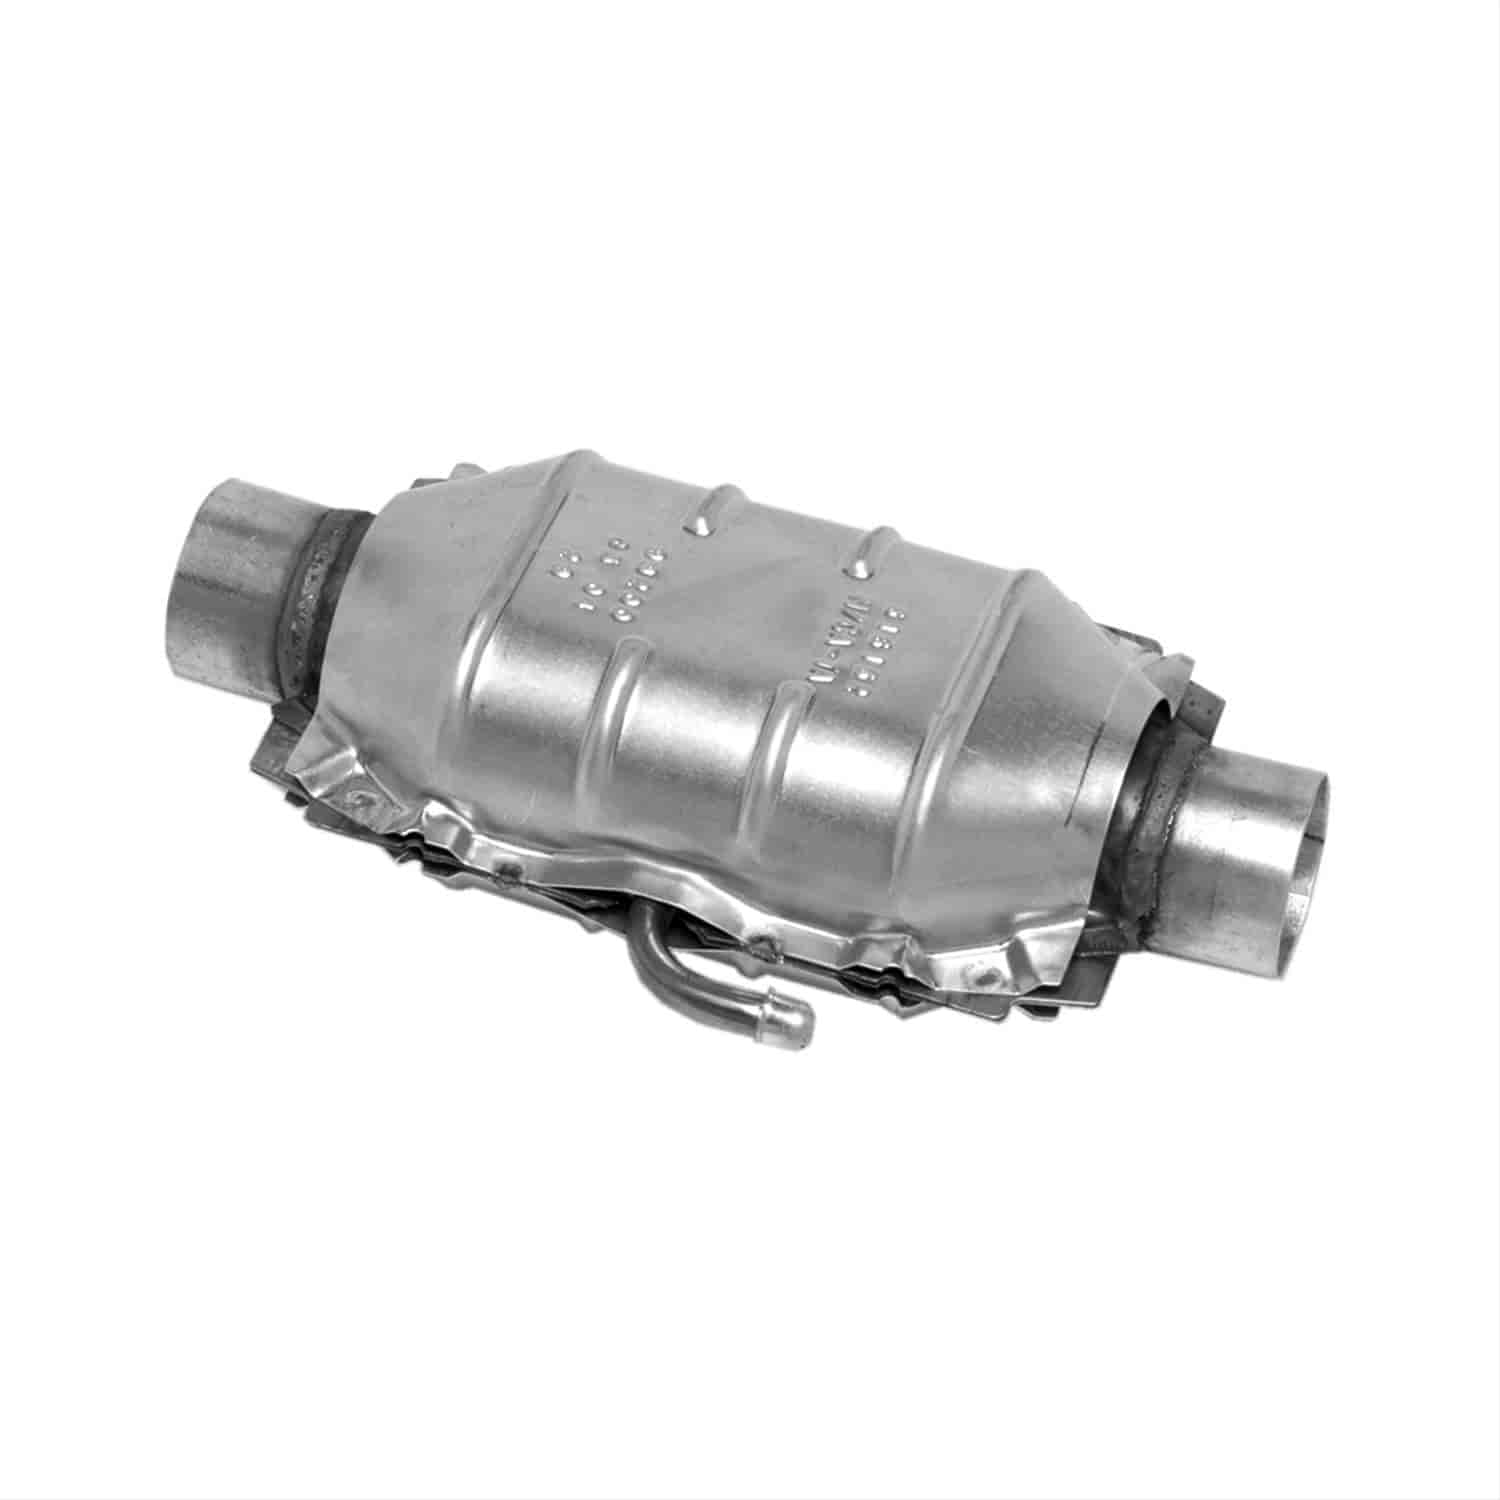 Standard Universal Catalytic Converter In/Out: 2"